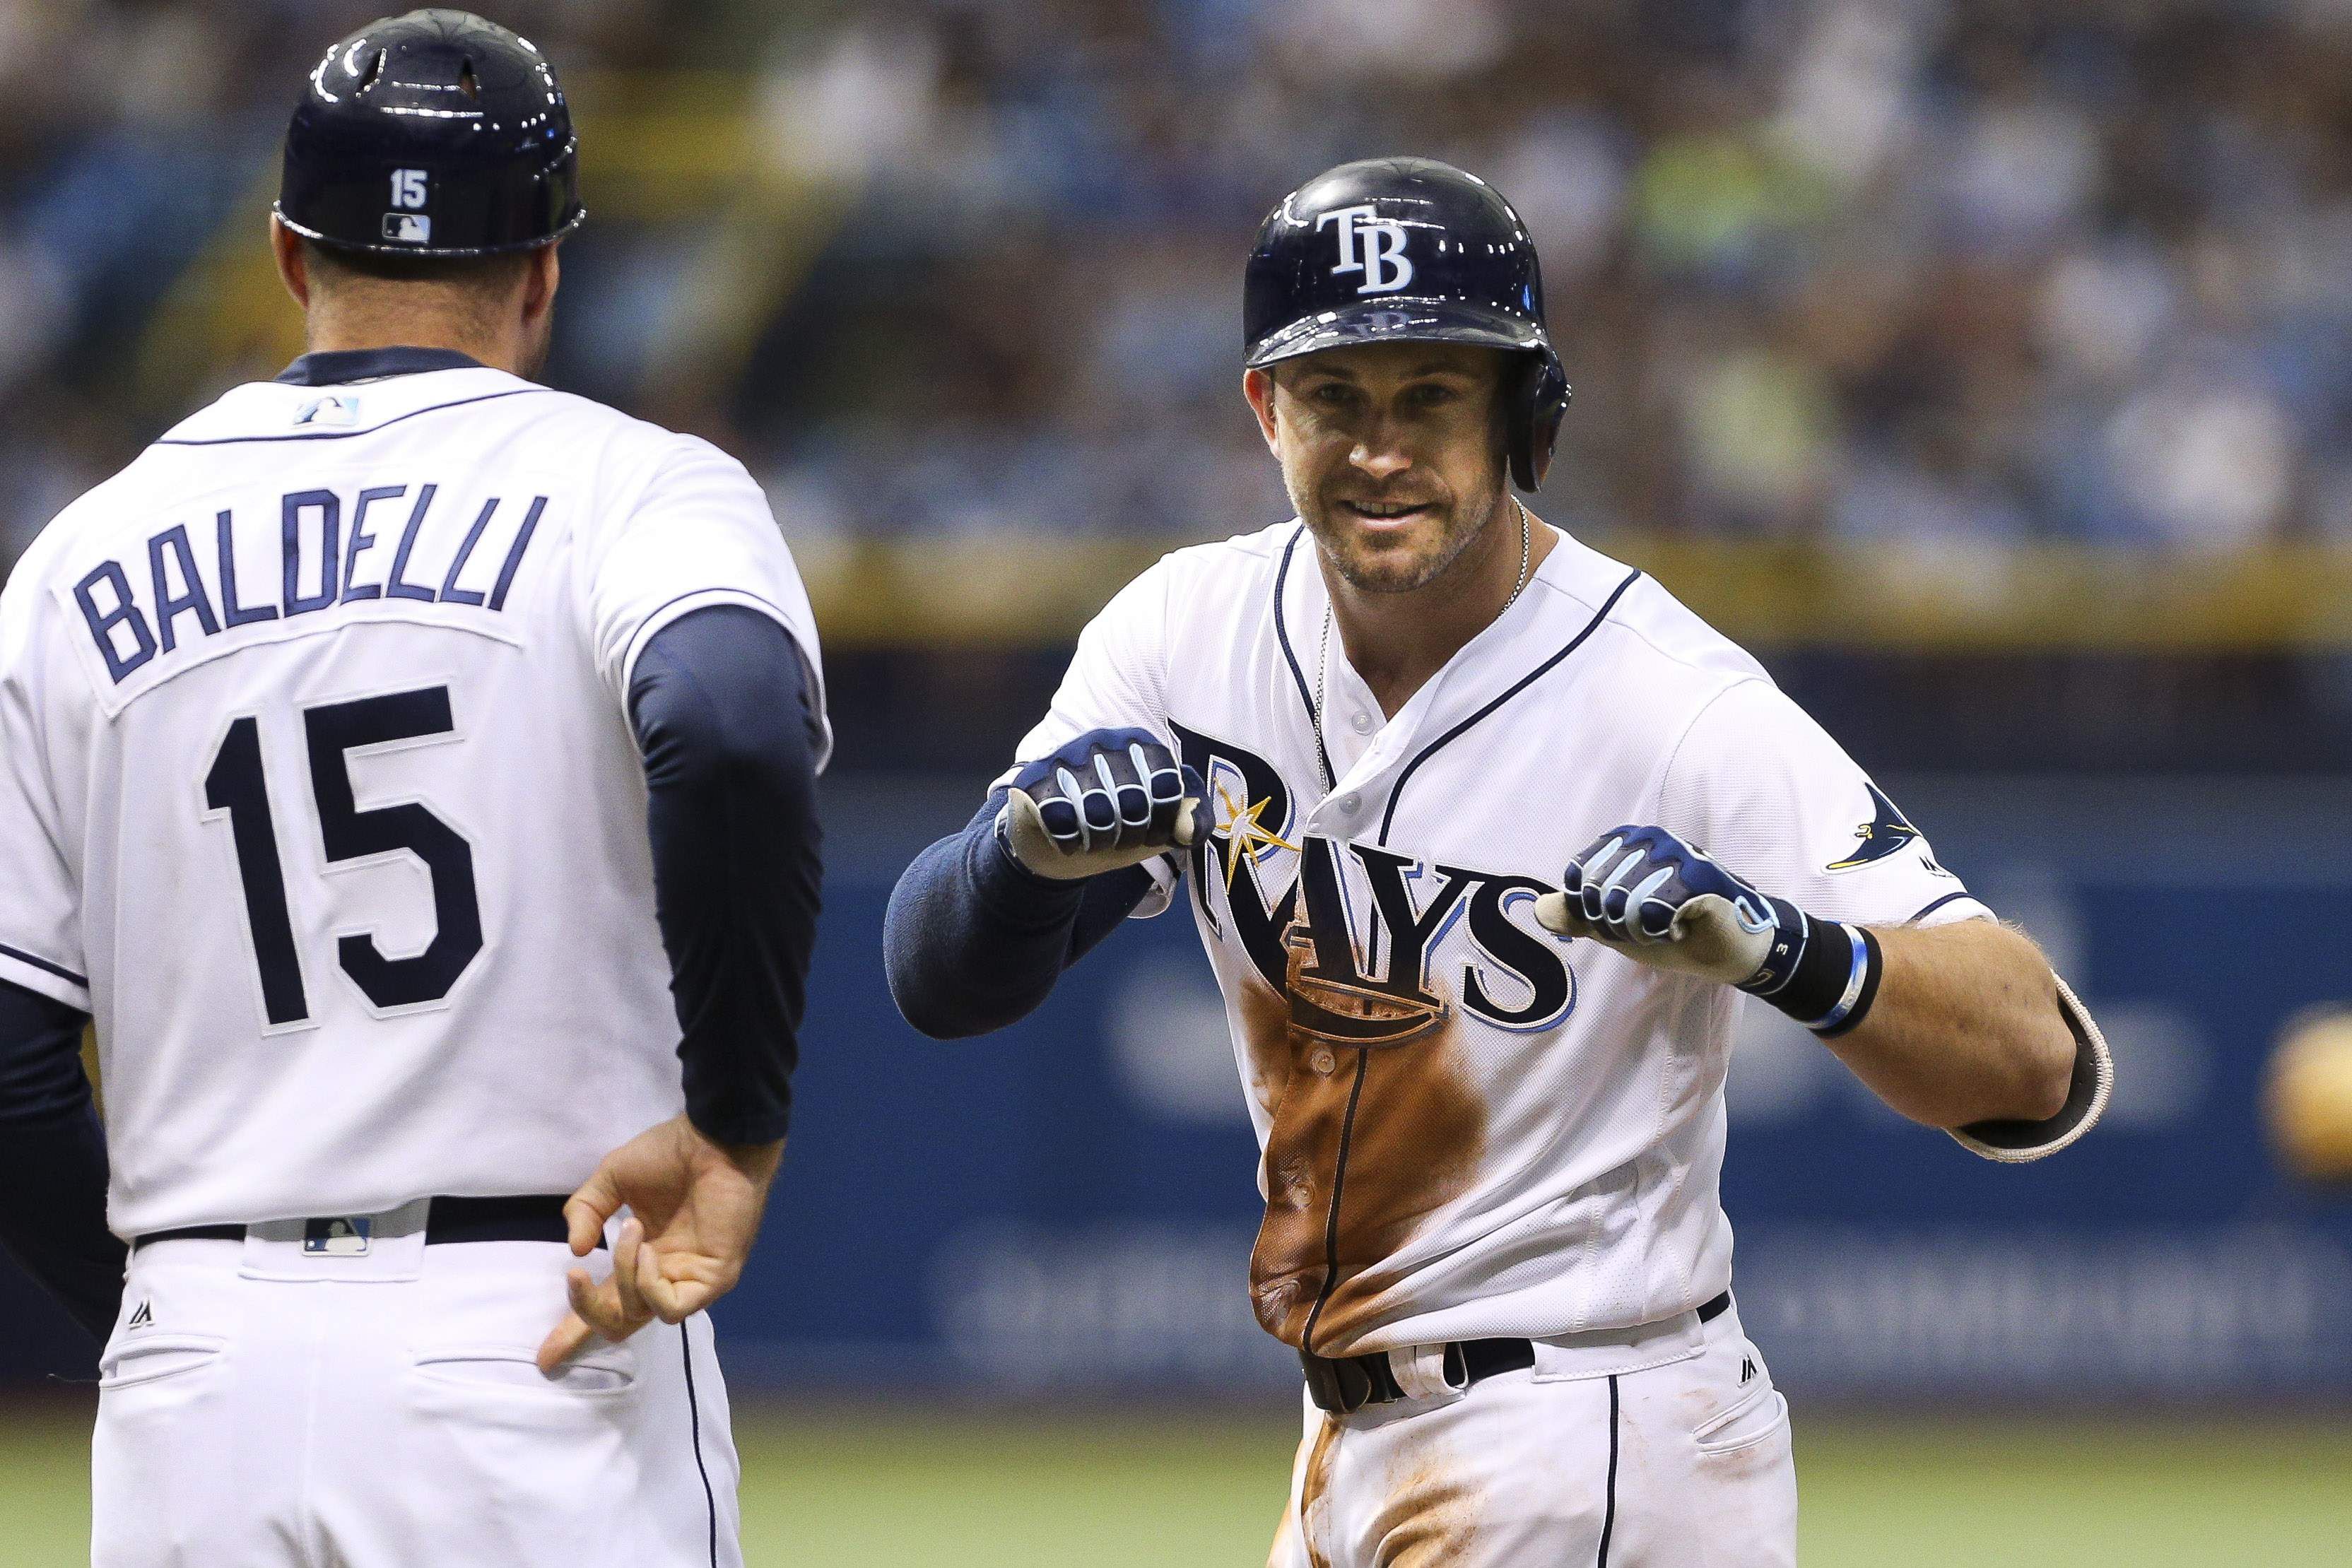 Evan Longoria happy to be face of Tampa Bay Rays